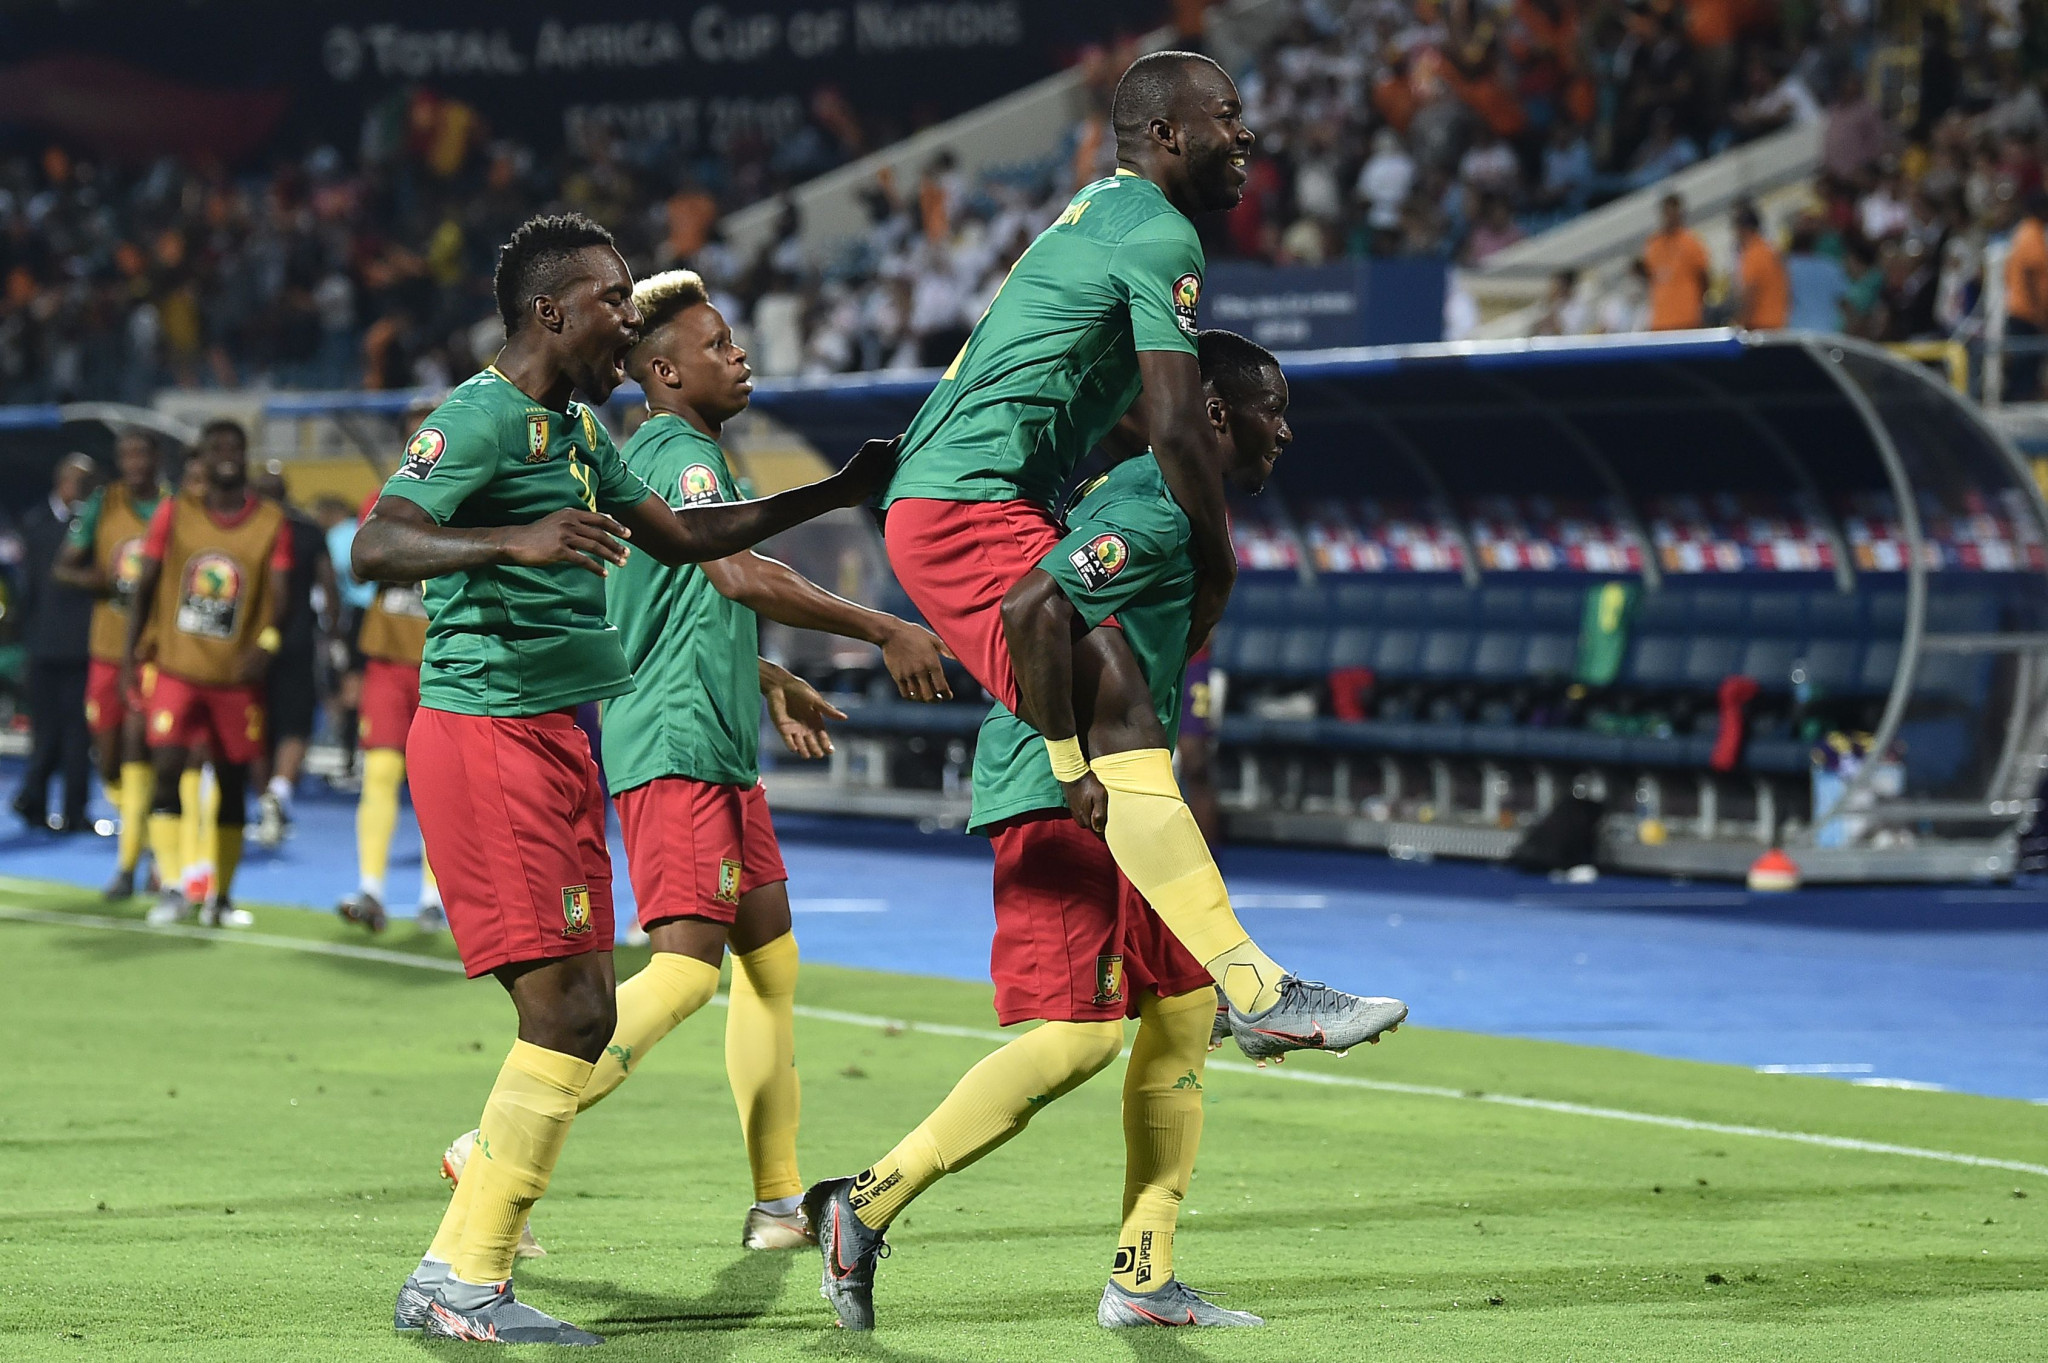 Cameroon put off-field dramas aside to claim opening Africa Cup of Nations victory